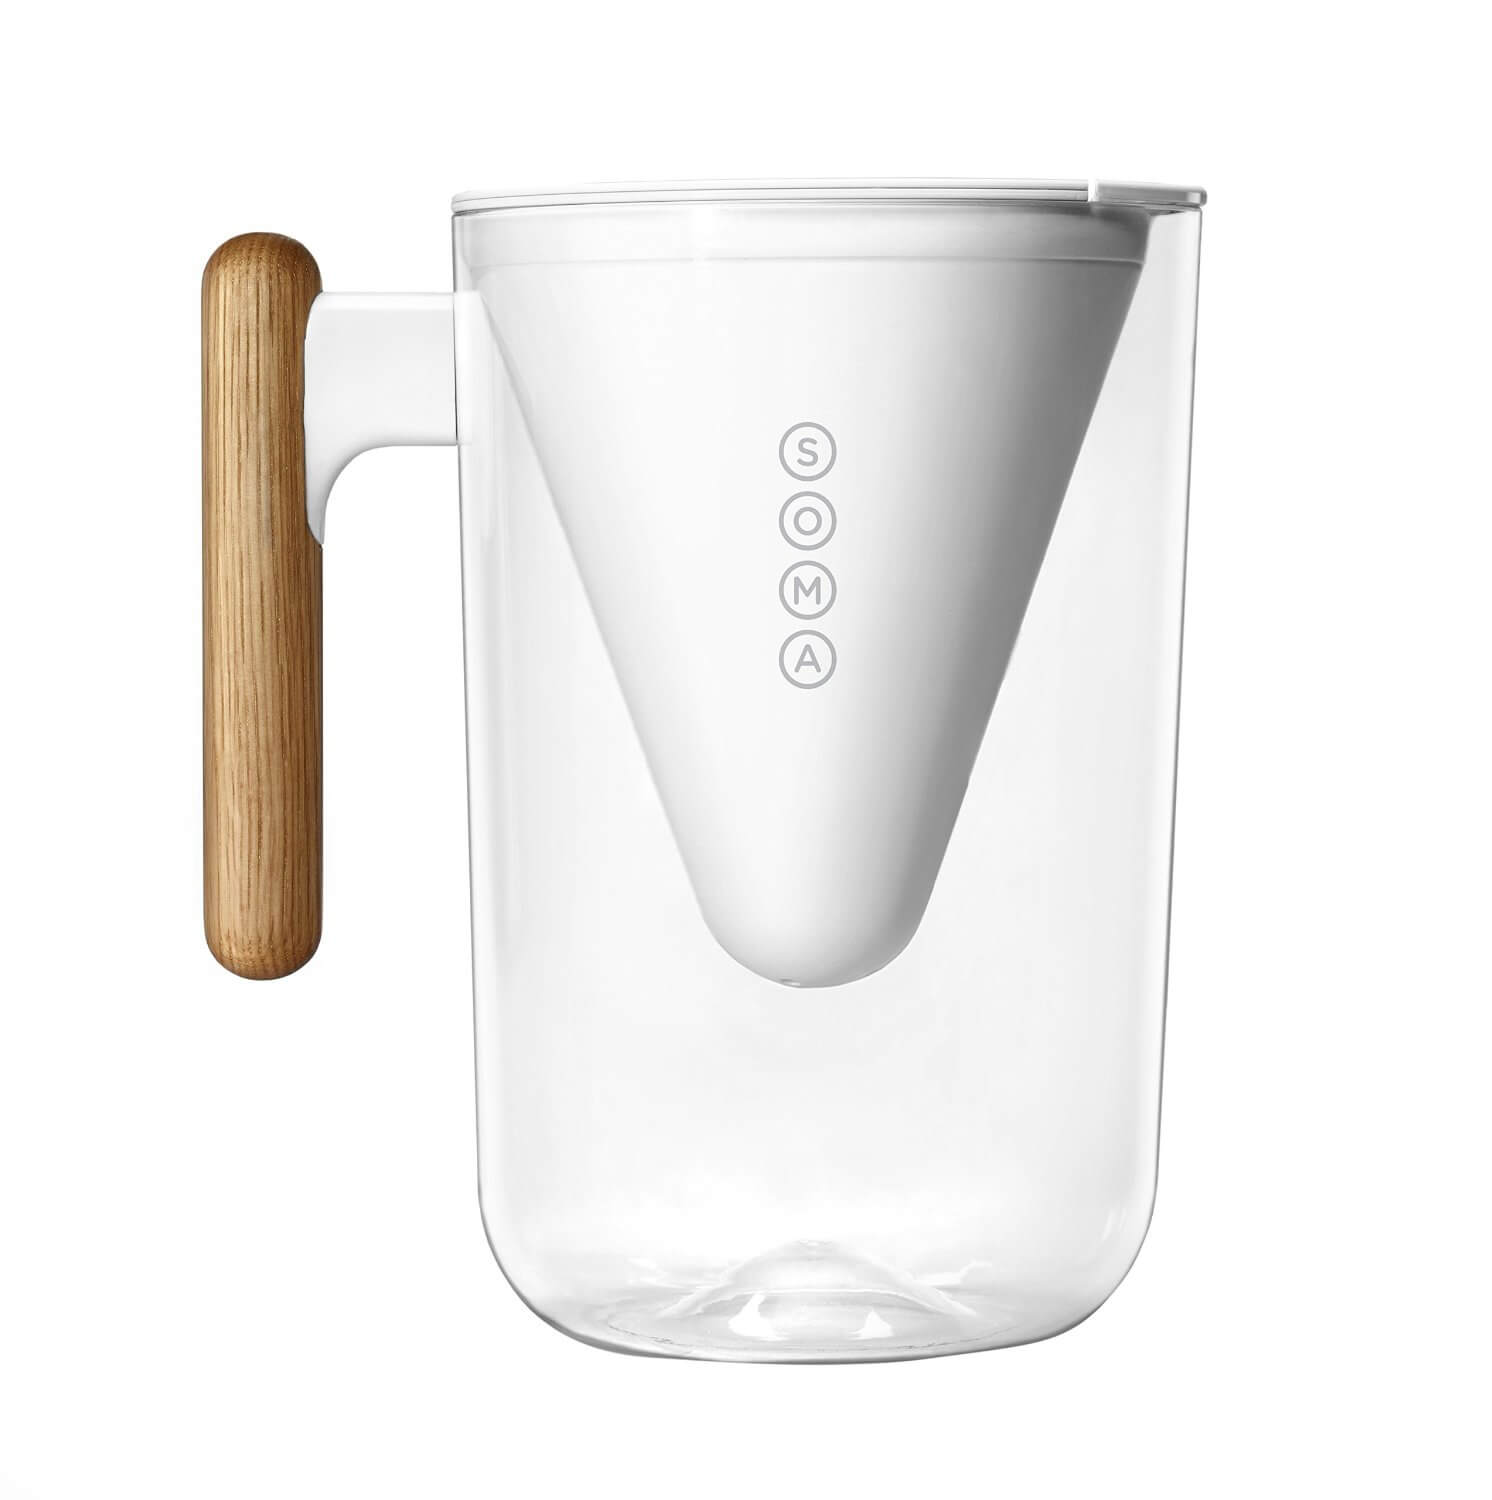 Soma Sustainable Water Filter & Pitcher